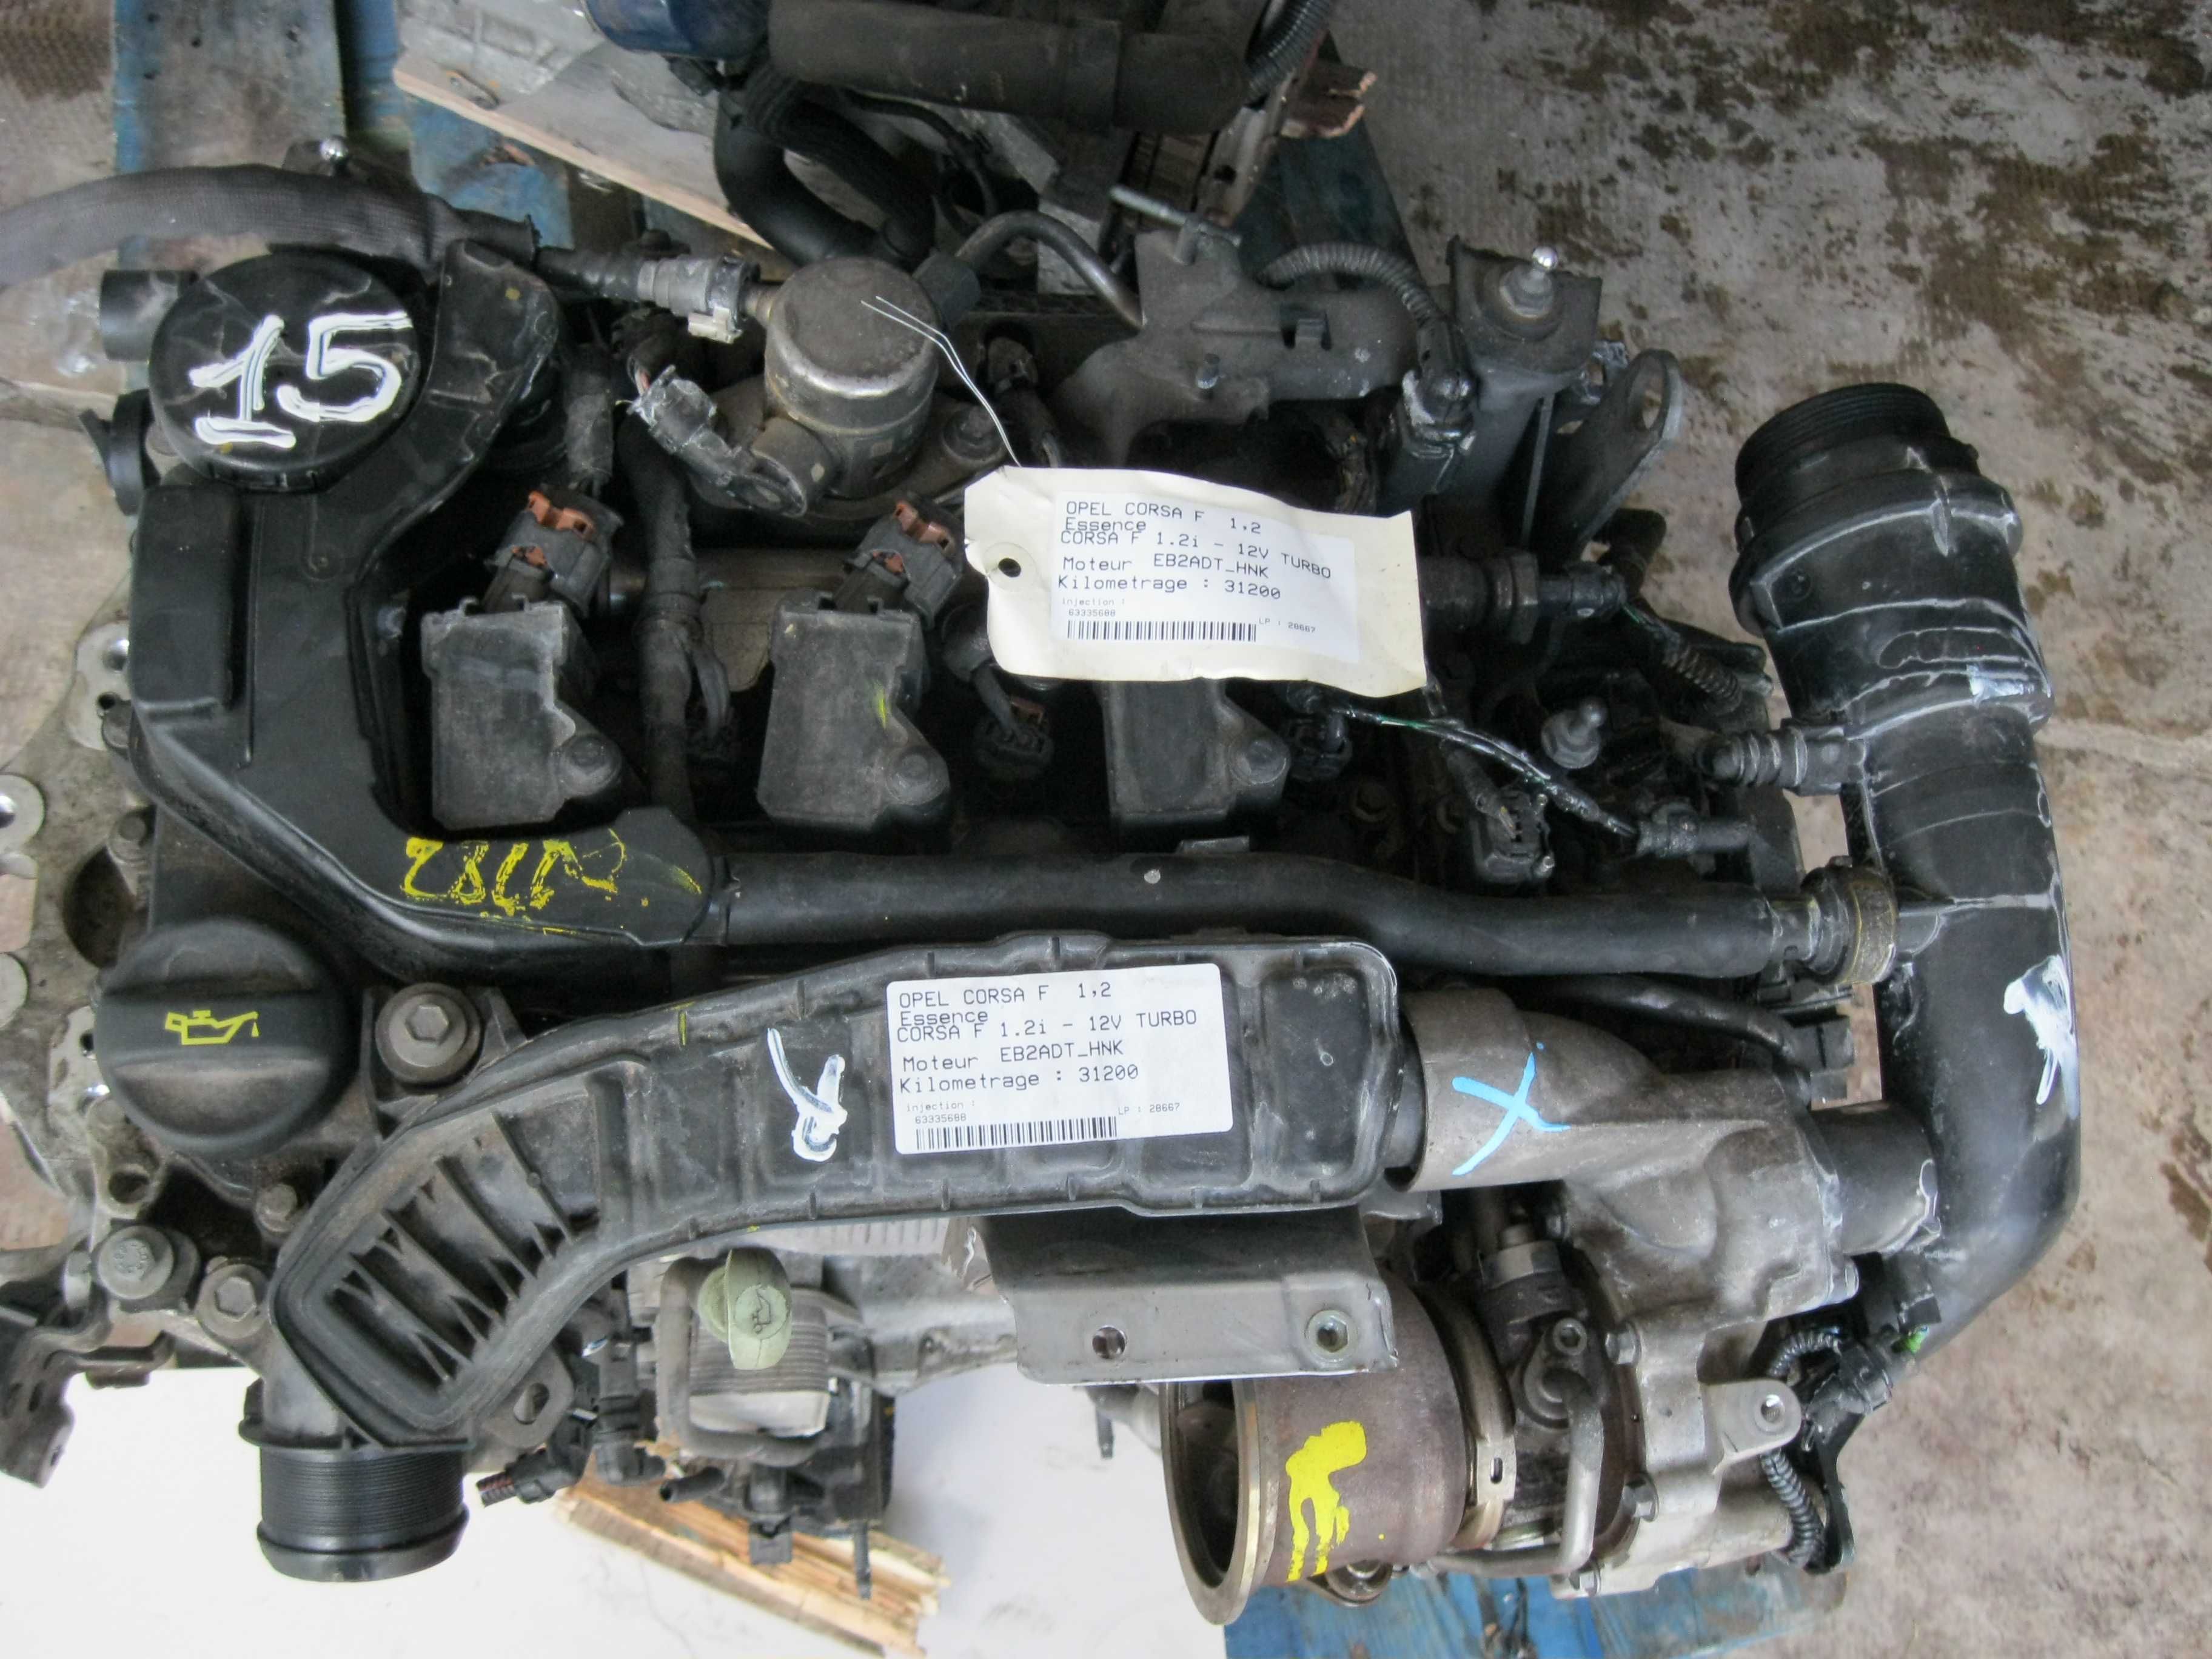 Motor 1,2i*EB2ADT_HNK*2020PeugeotCitroenOpelCorsaF*101CpEur6CuAnexe*Fr